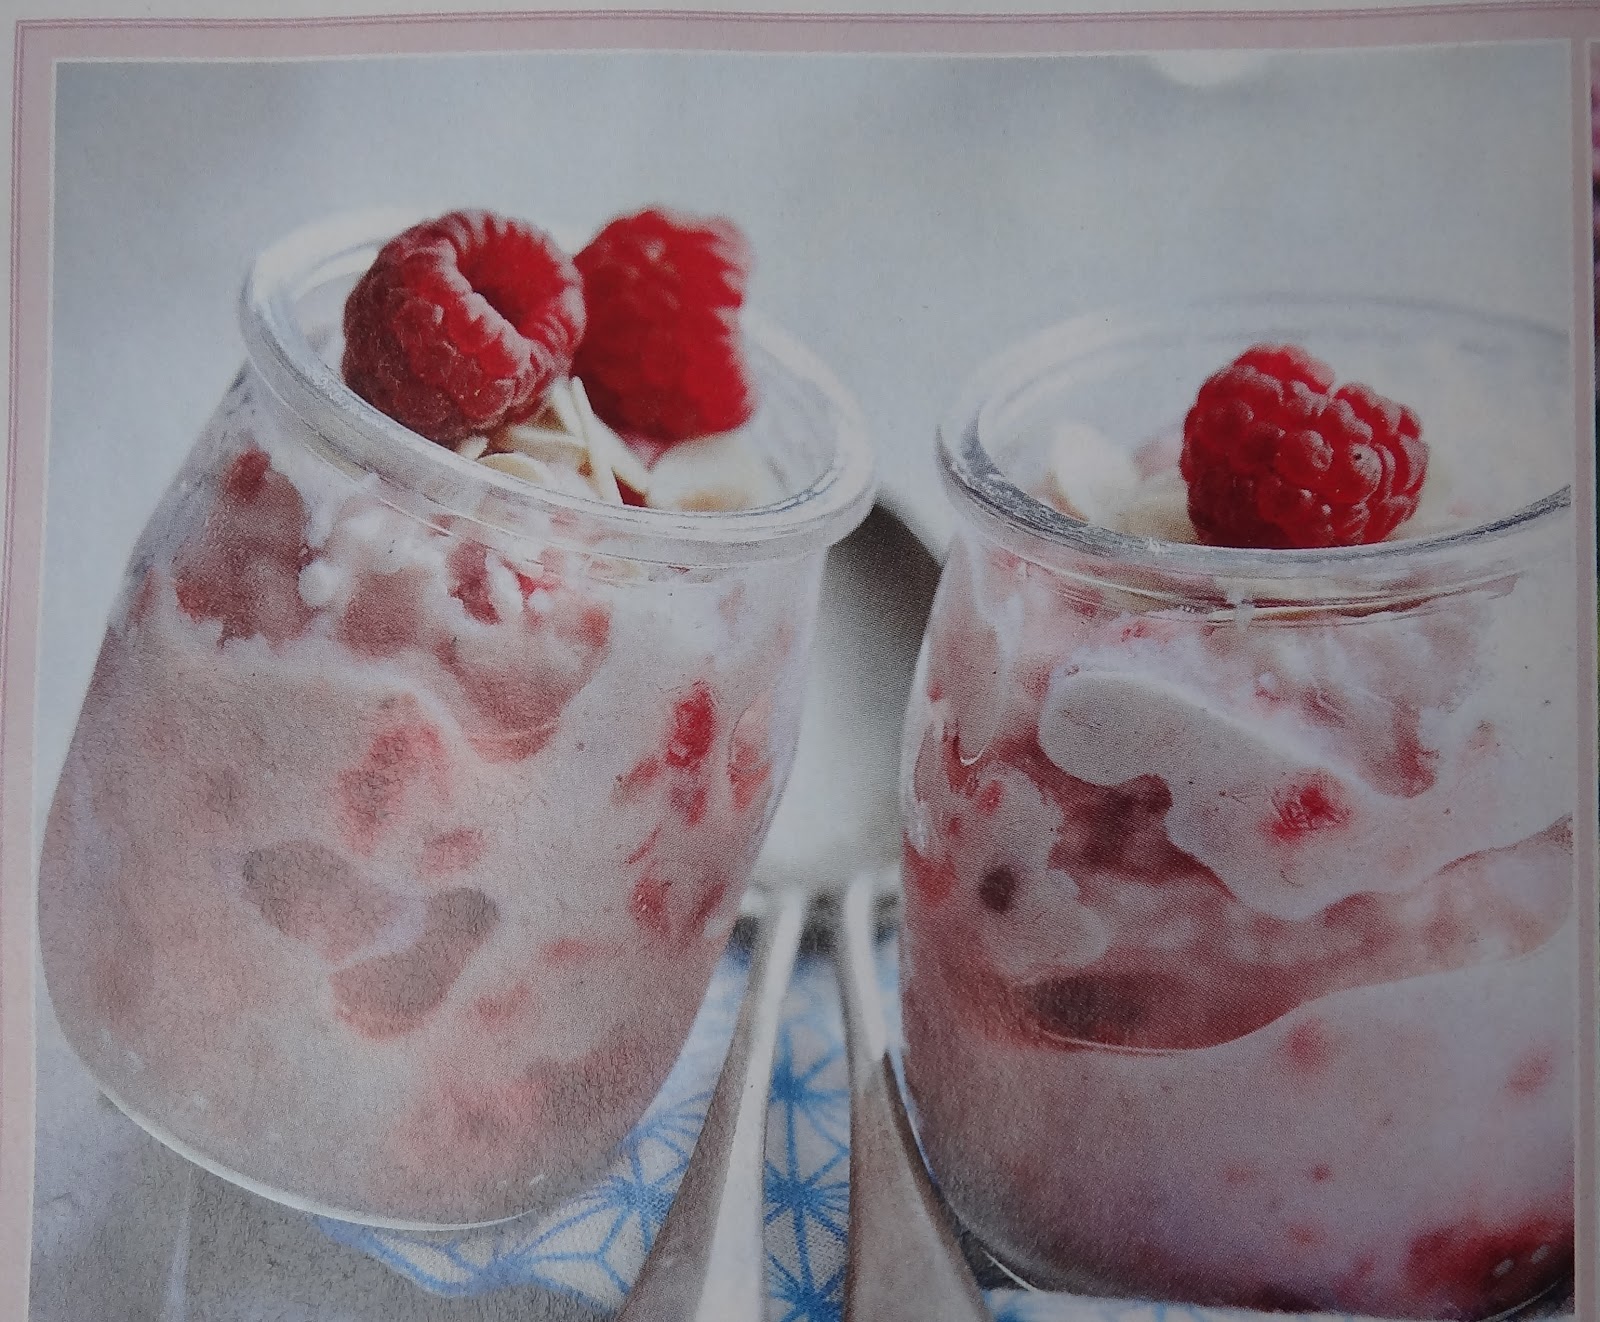 shabby, white and more...: Himmlisches Himbeer-Joghurt-Eis